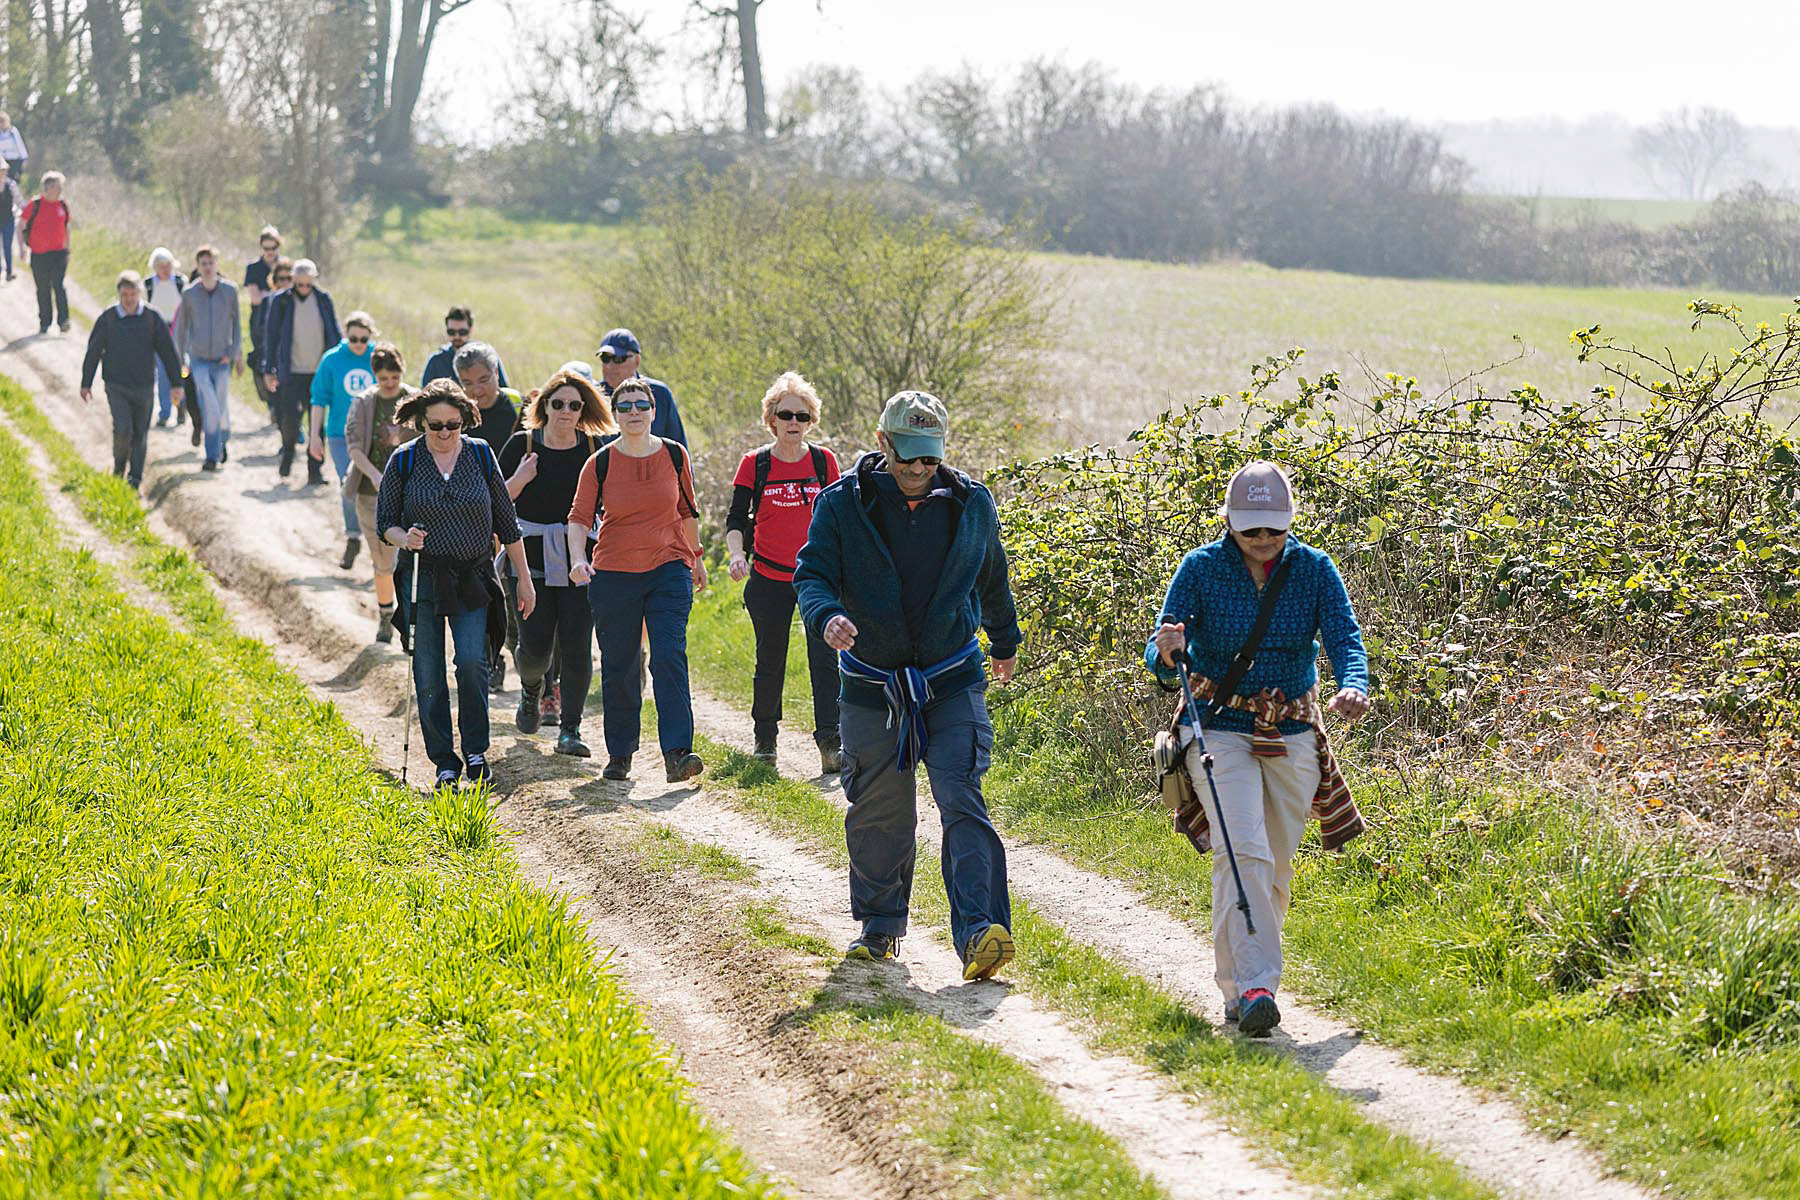 Book now for Maidstone’s Heart of Kent Walking Festival